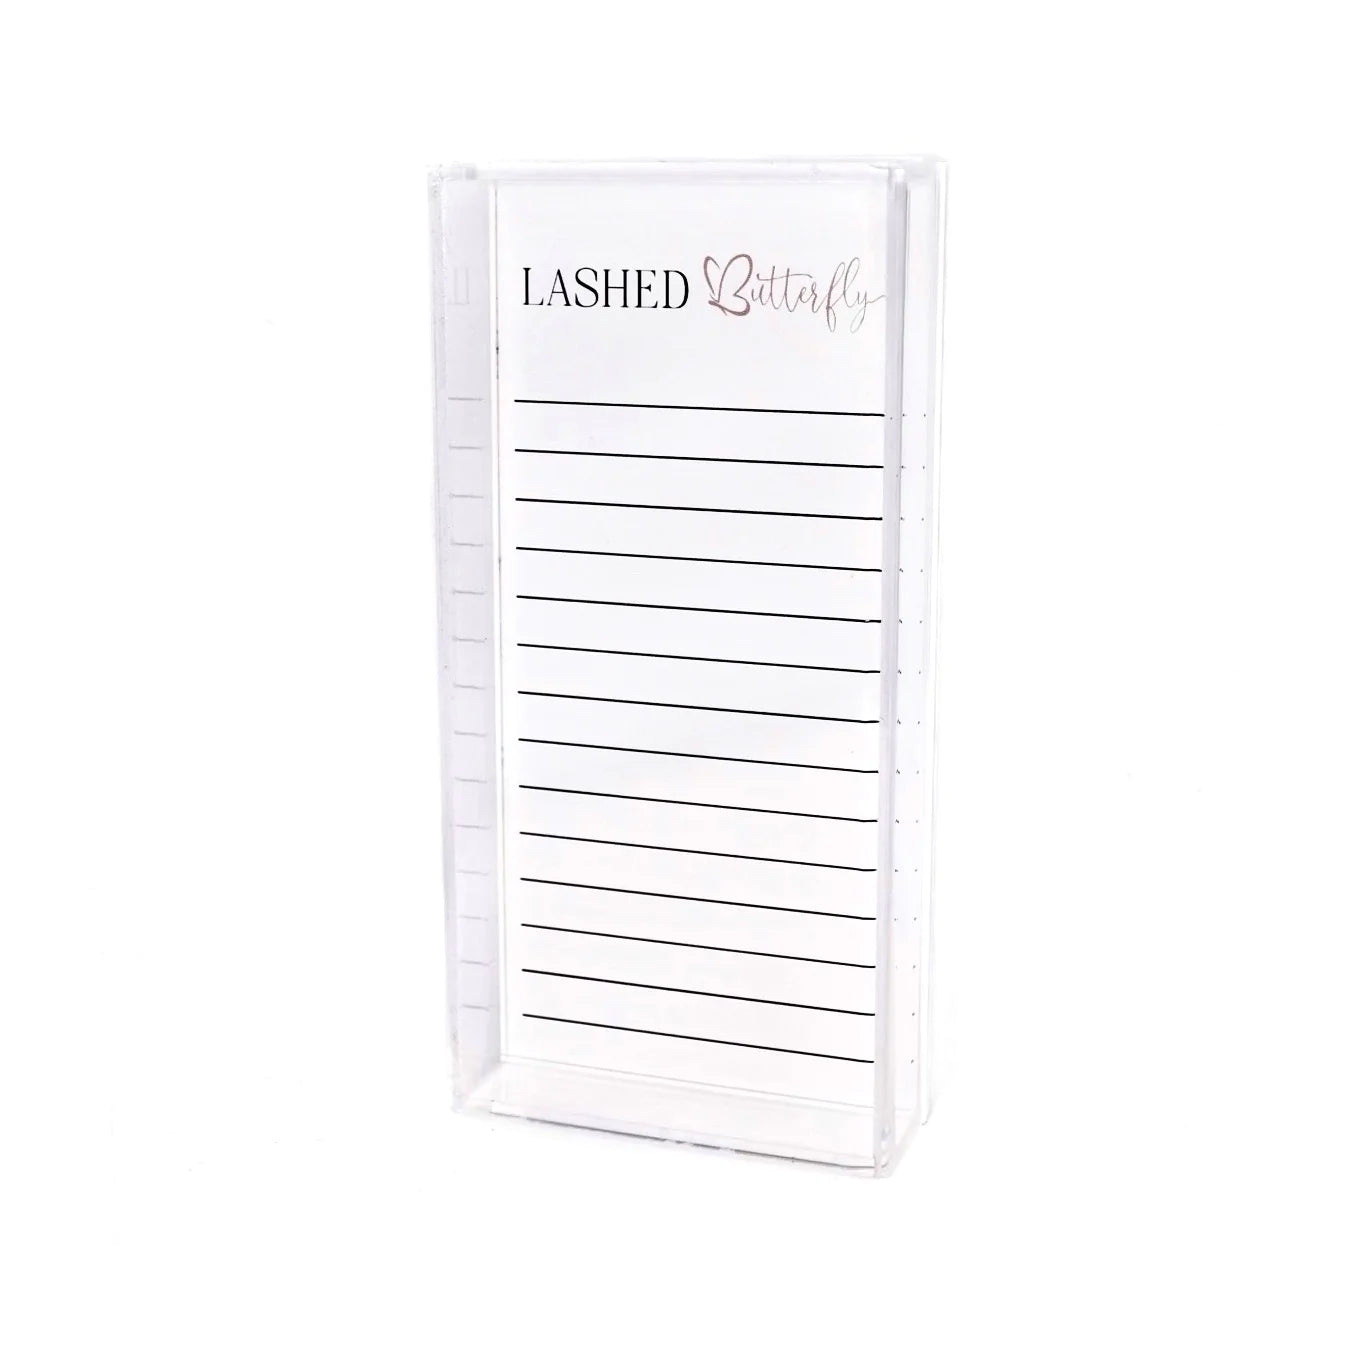 Lashed Butterfly Lash Tile